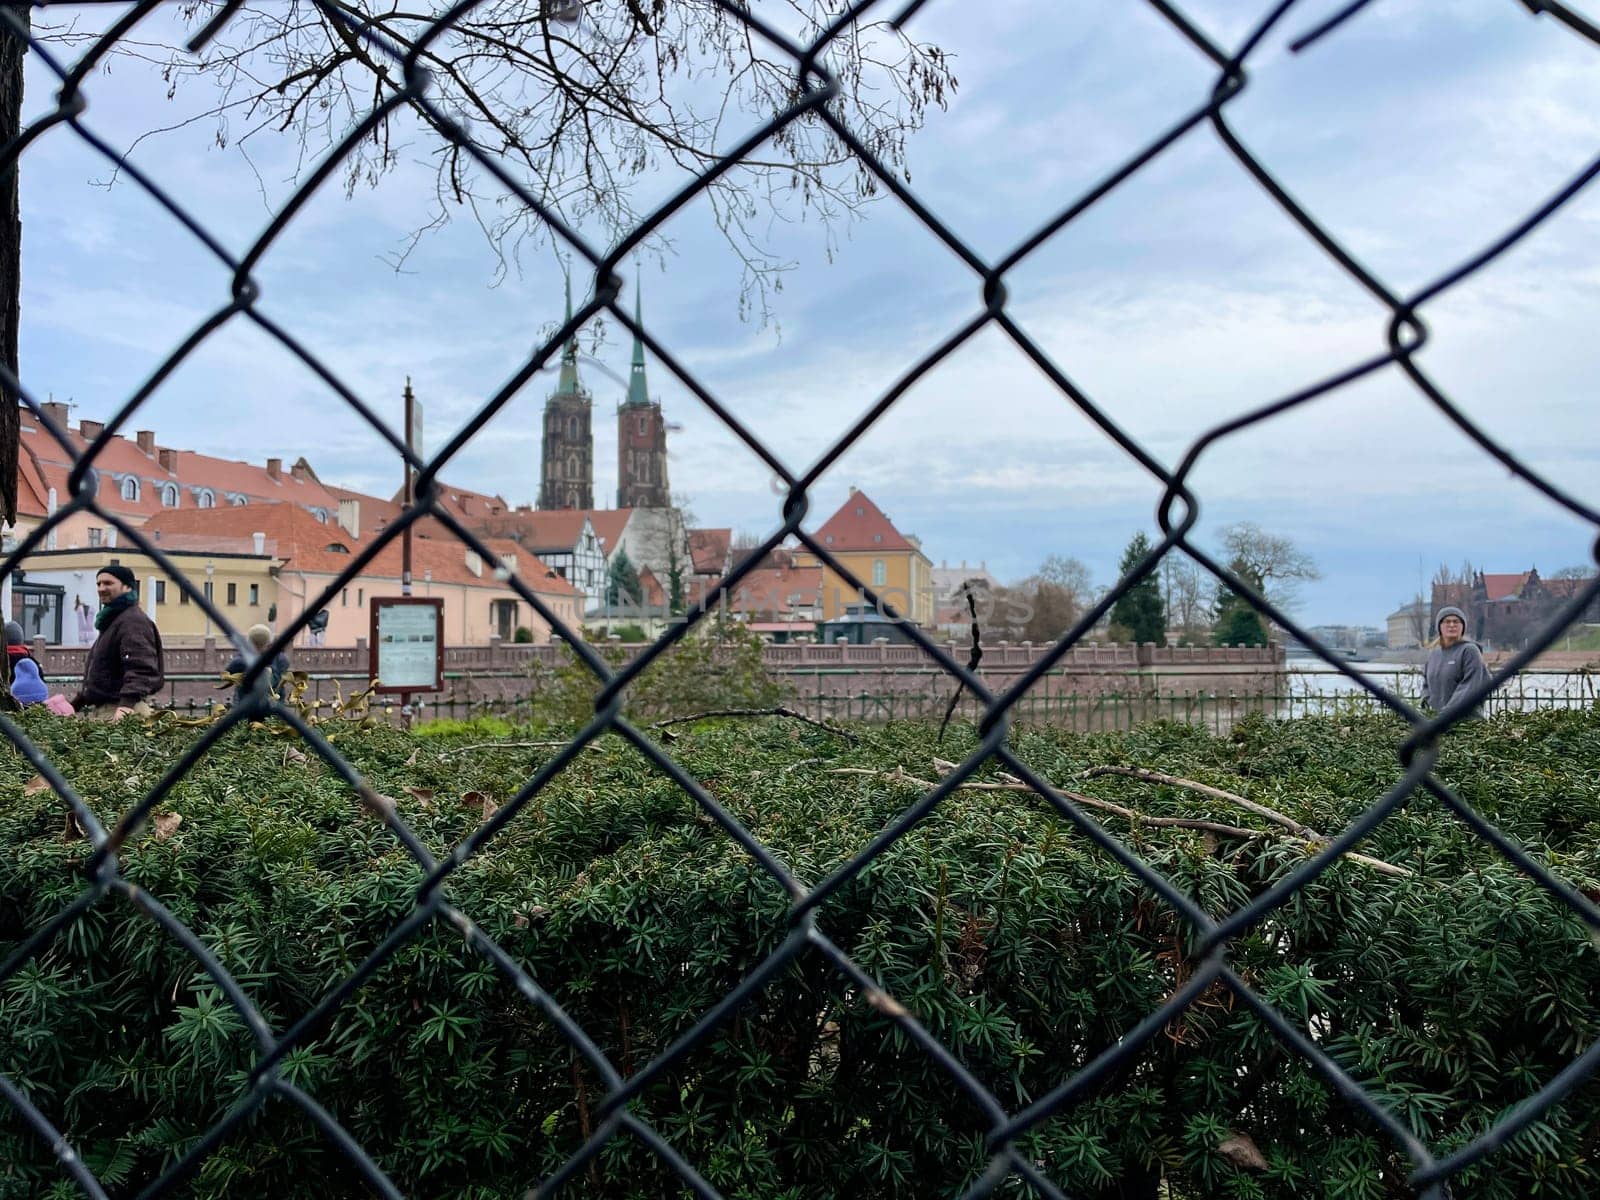 A glimpse of the city through the fence of woven metal mesh. High quality photo